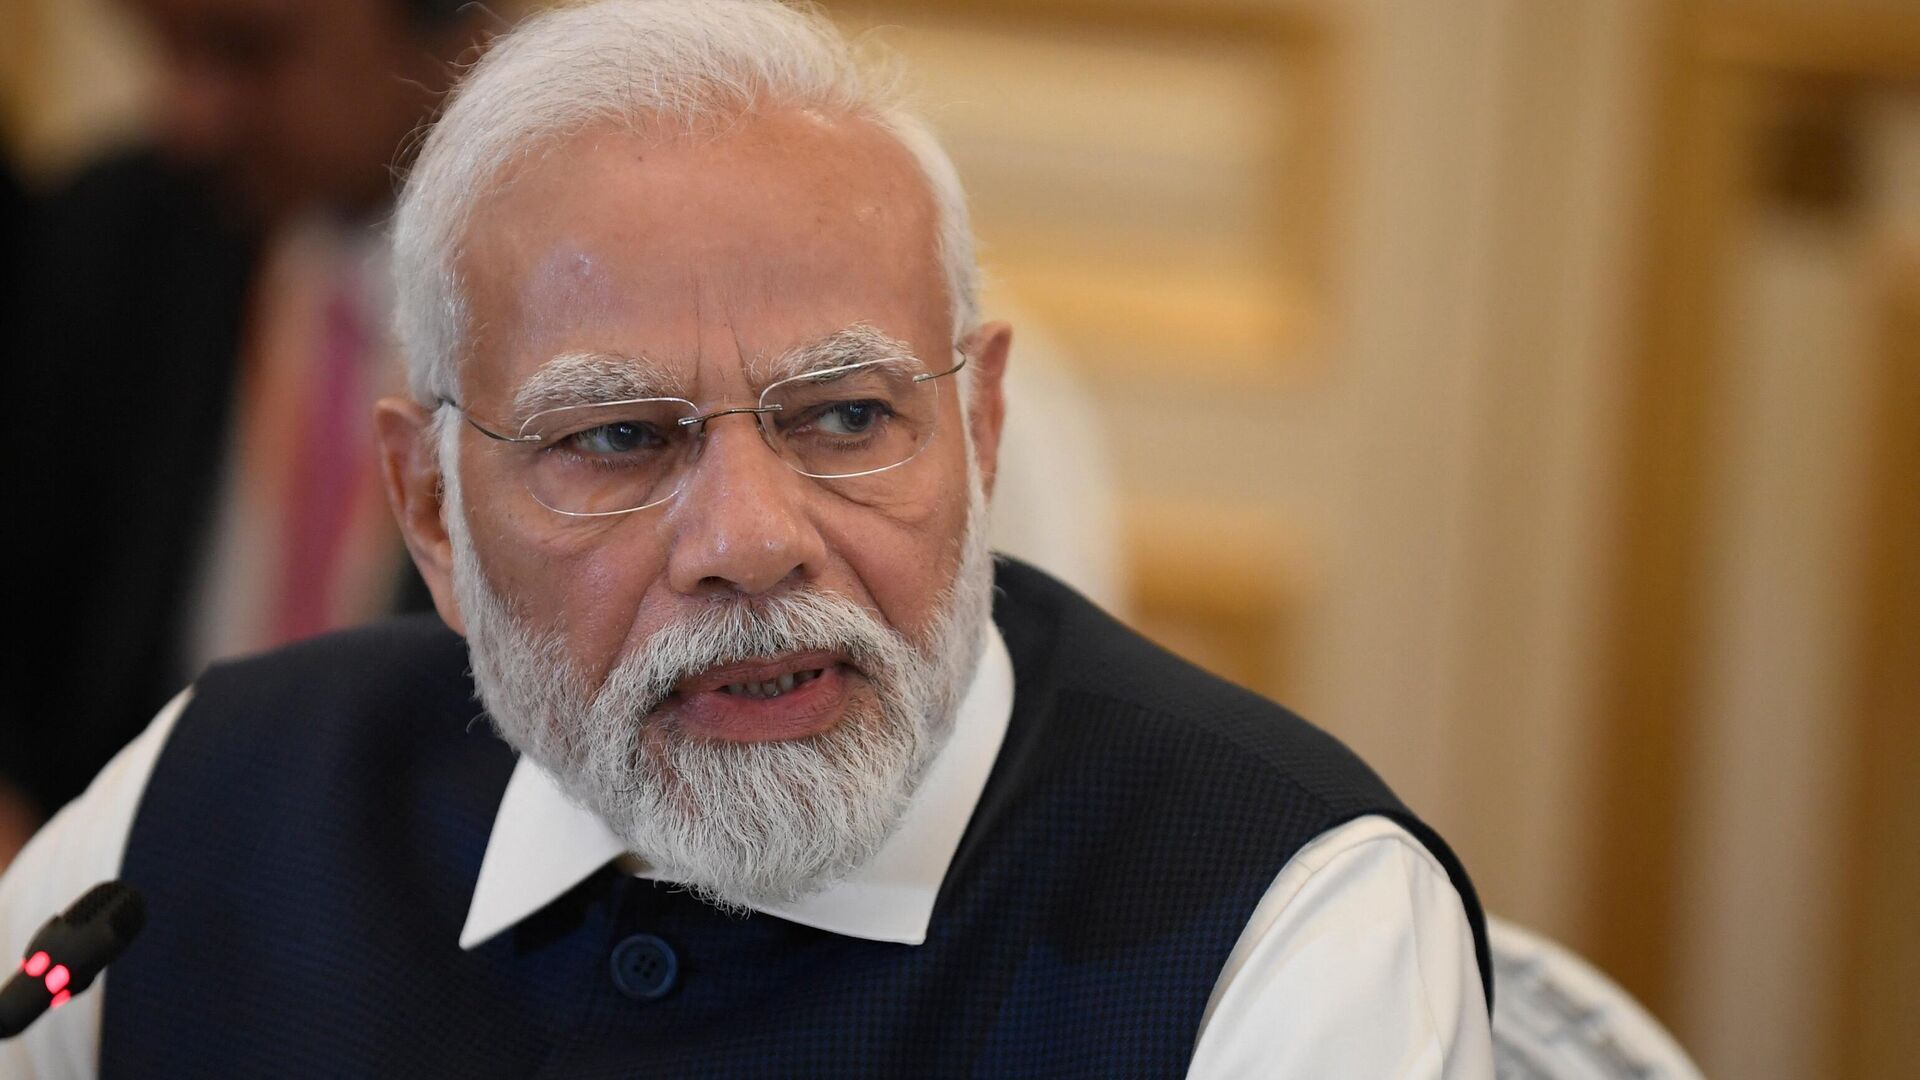 Modi government harassing journalists and dissenters: U.S.